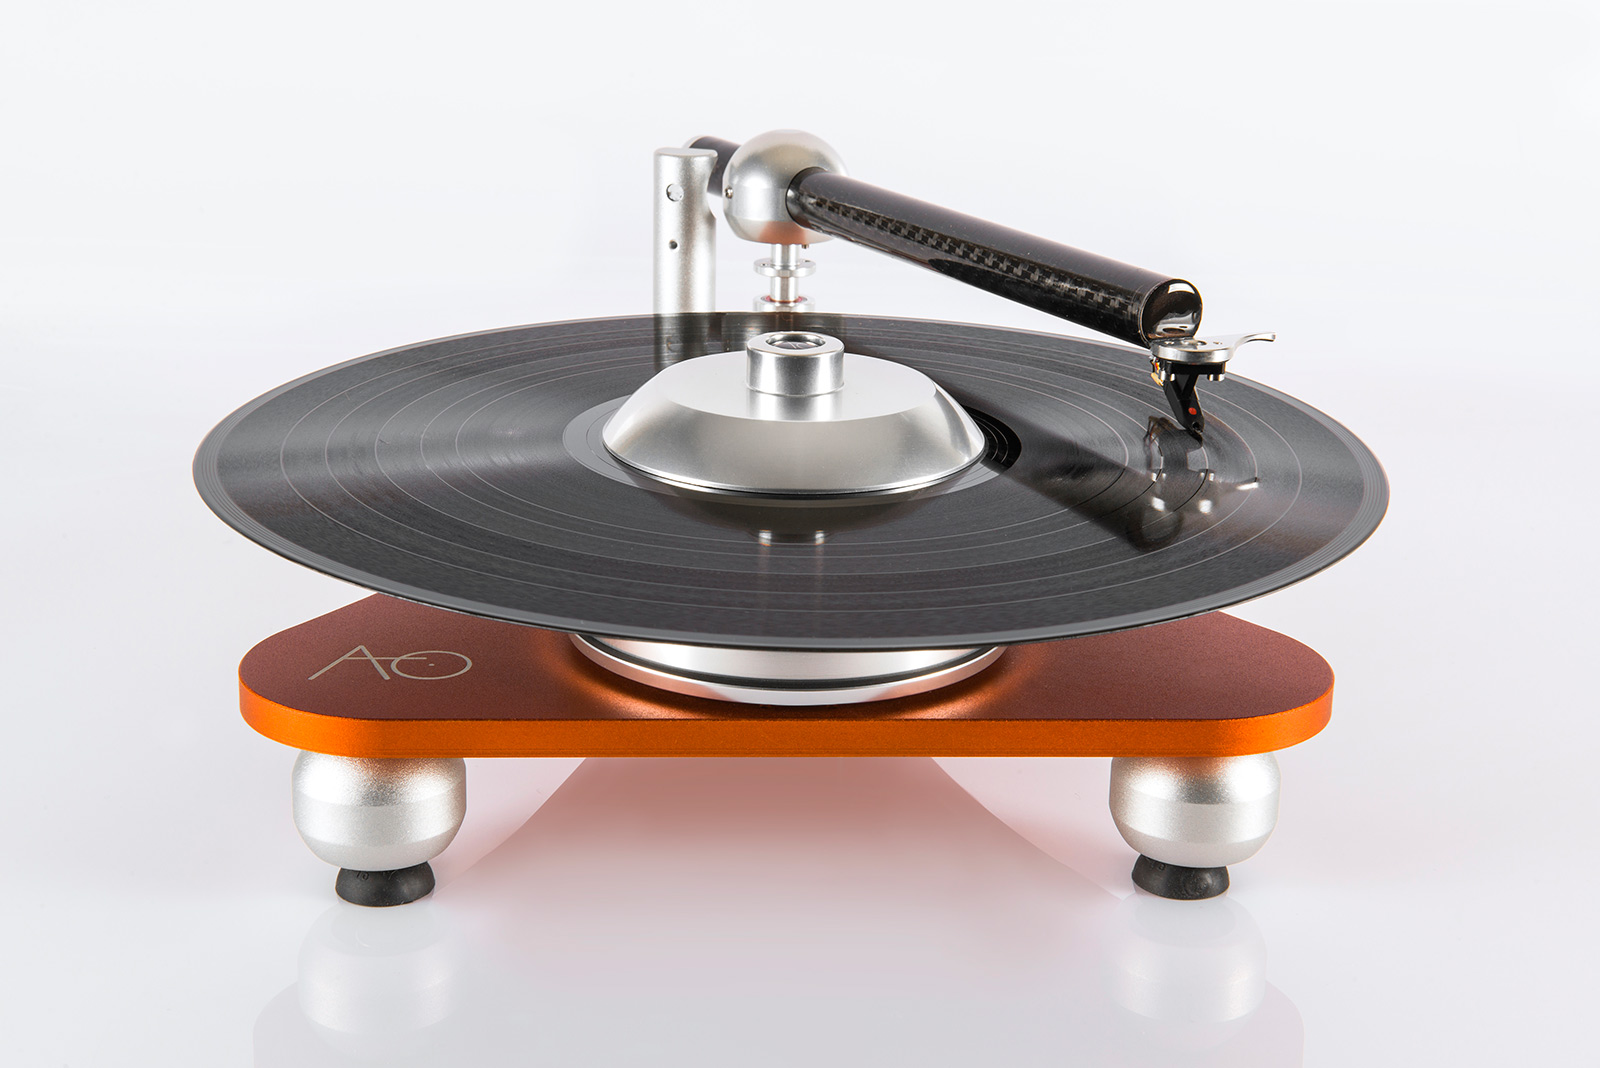 Atmo Sfera Platterless Turntable Spins Vinyl in the Air - COOL HUNTING®